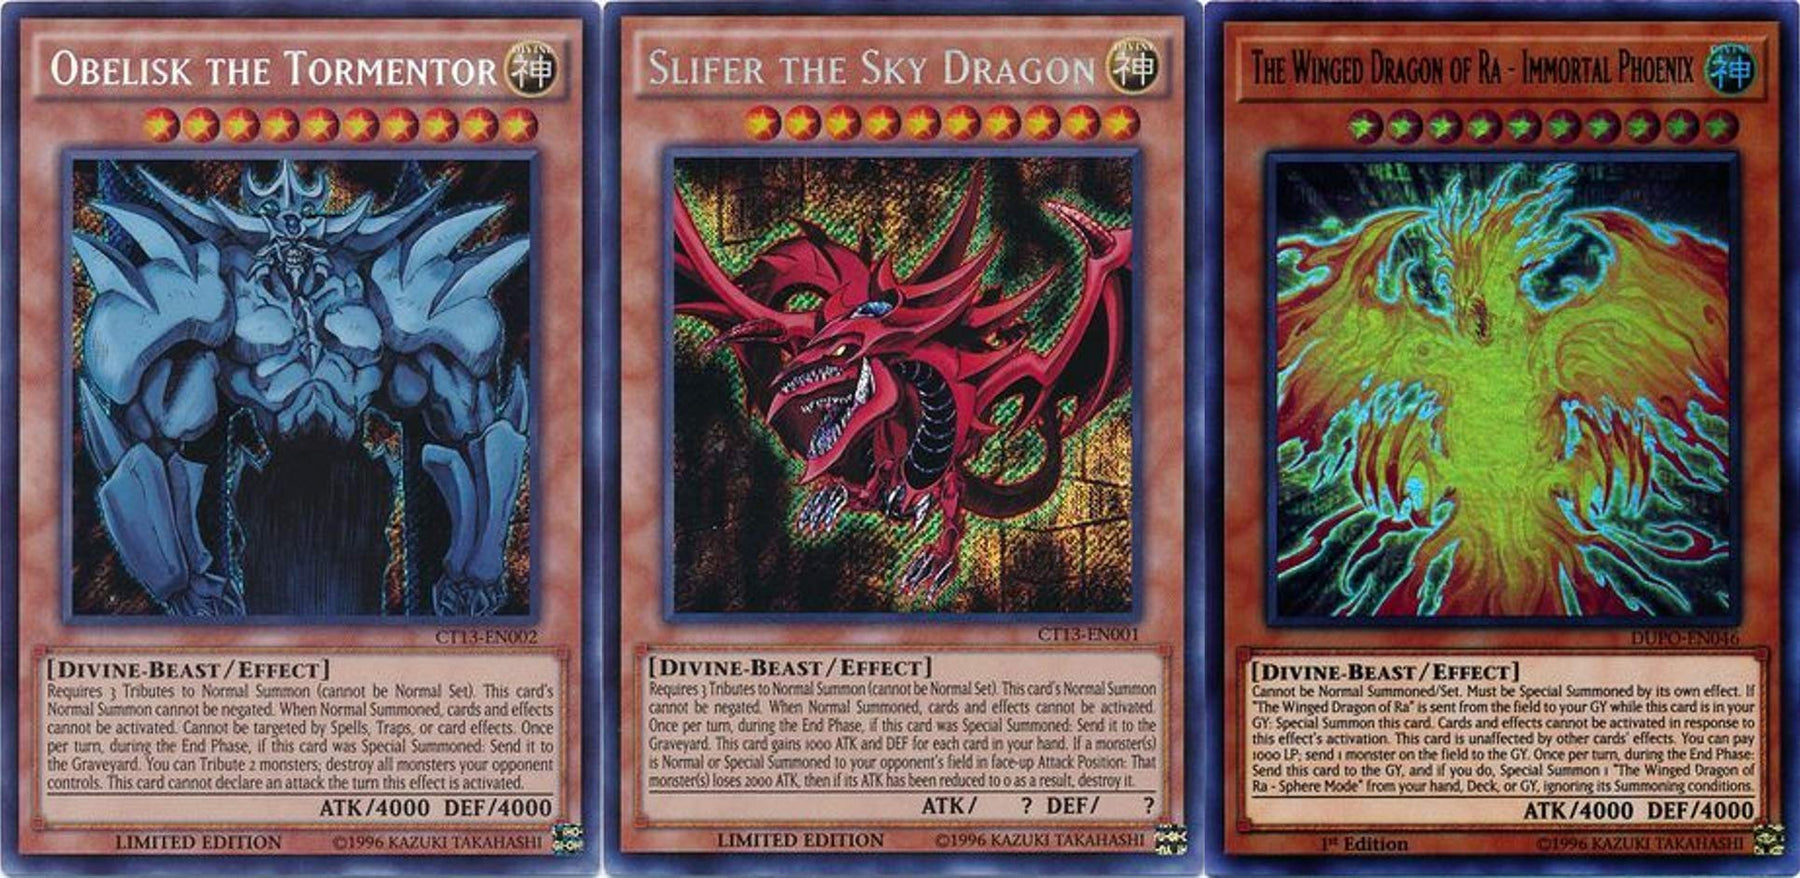 Yugioh monsters in Yu-Gi-Oh that are level 4 or less but have high attack points